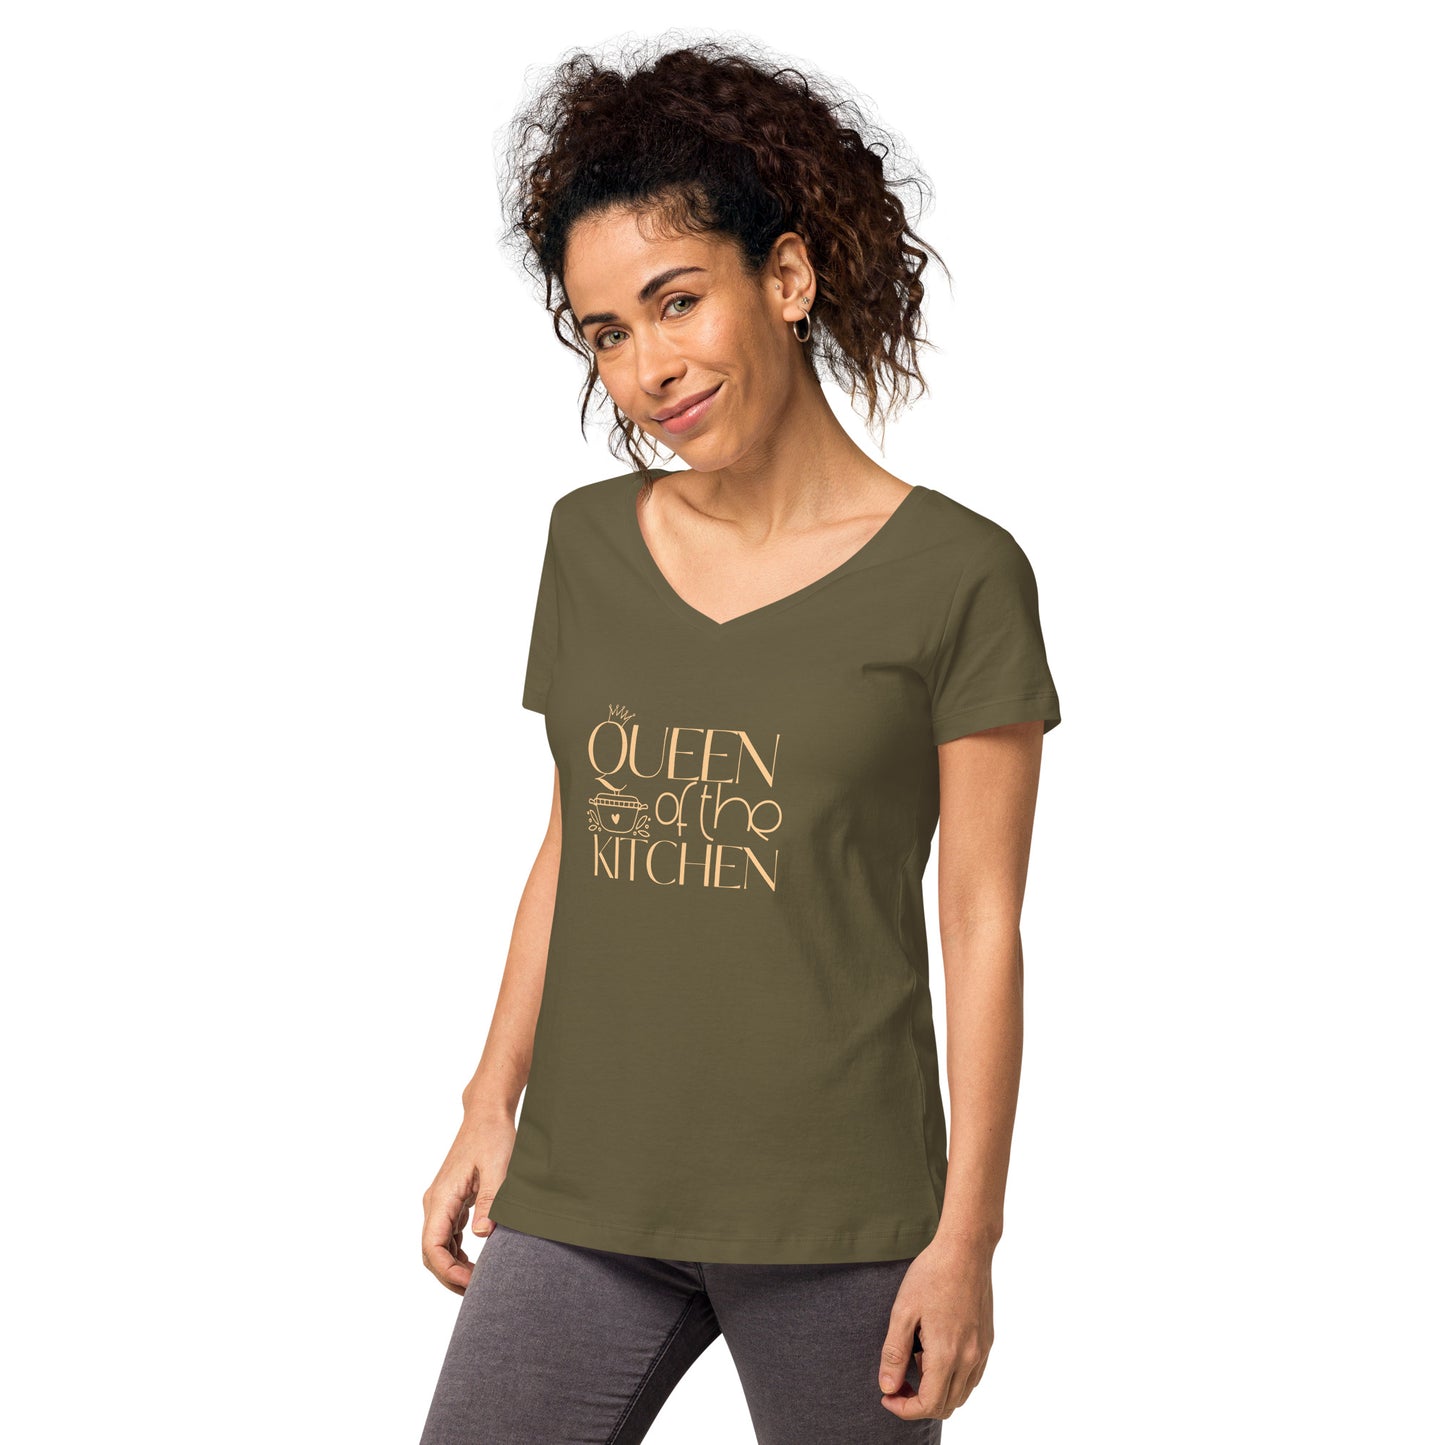 Queen of the Kitchen - Women’s fitted v-neck t-shirt - HobbyMeFree